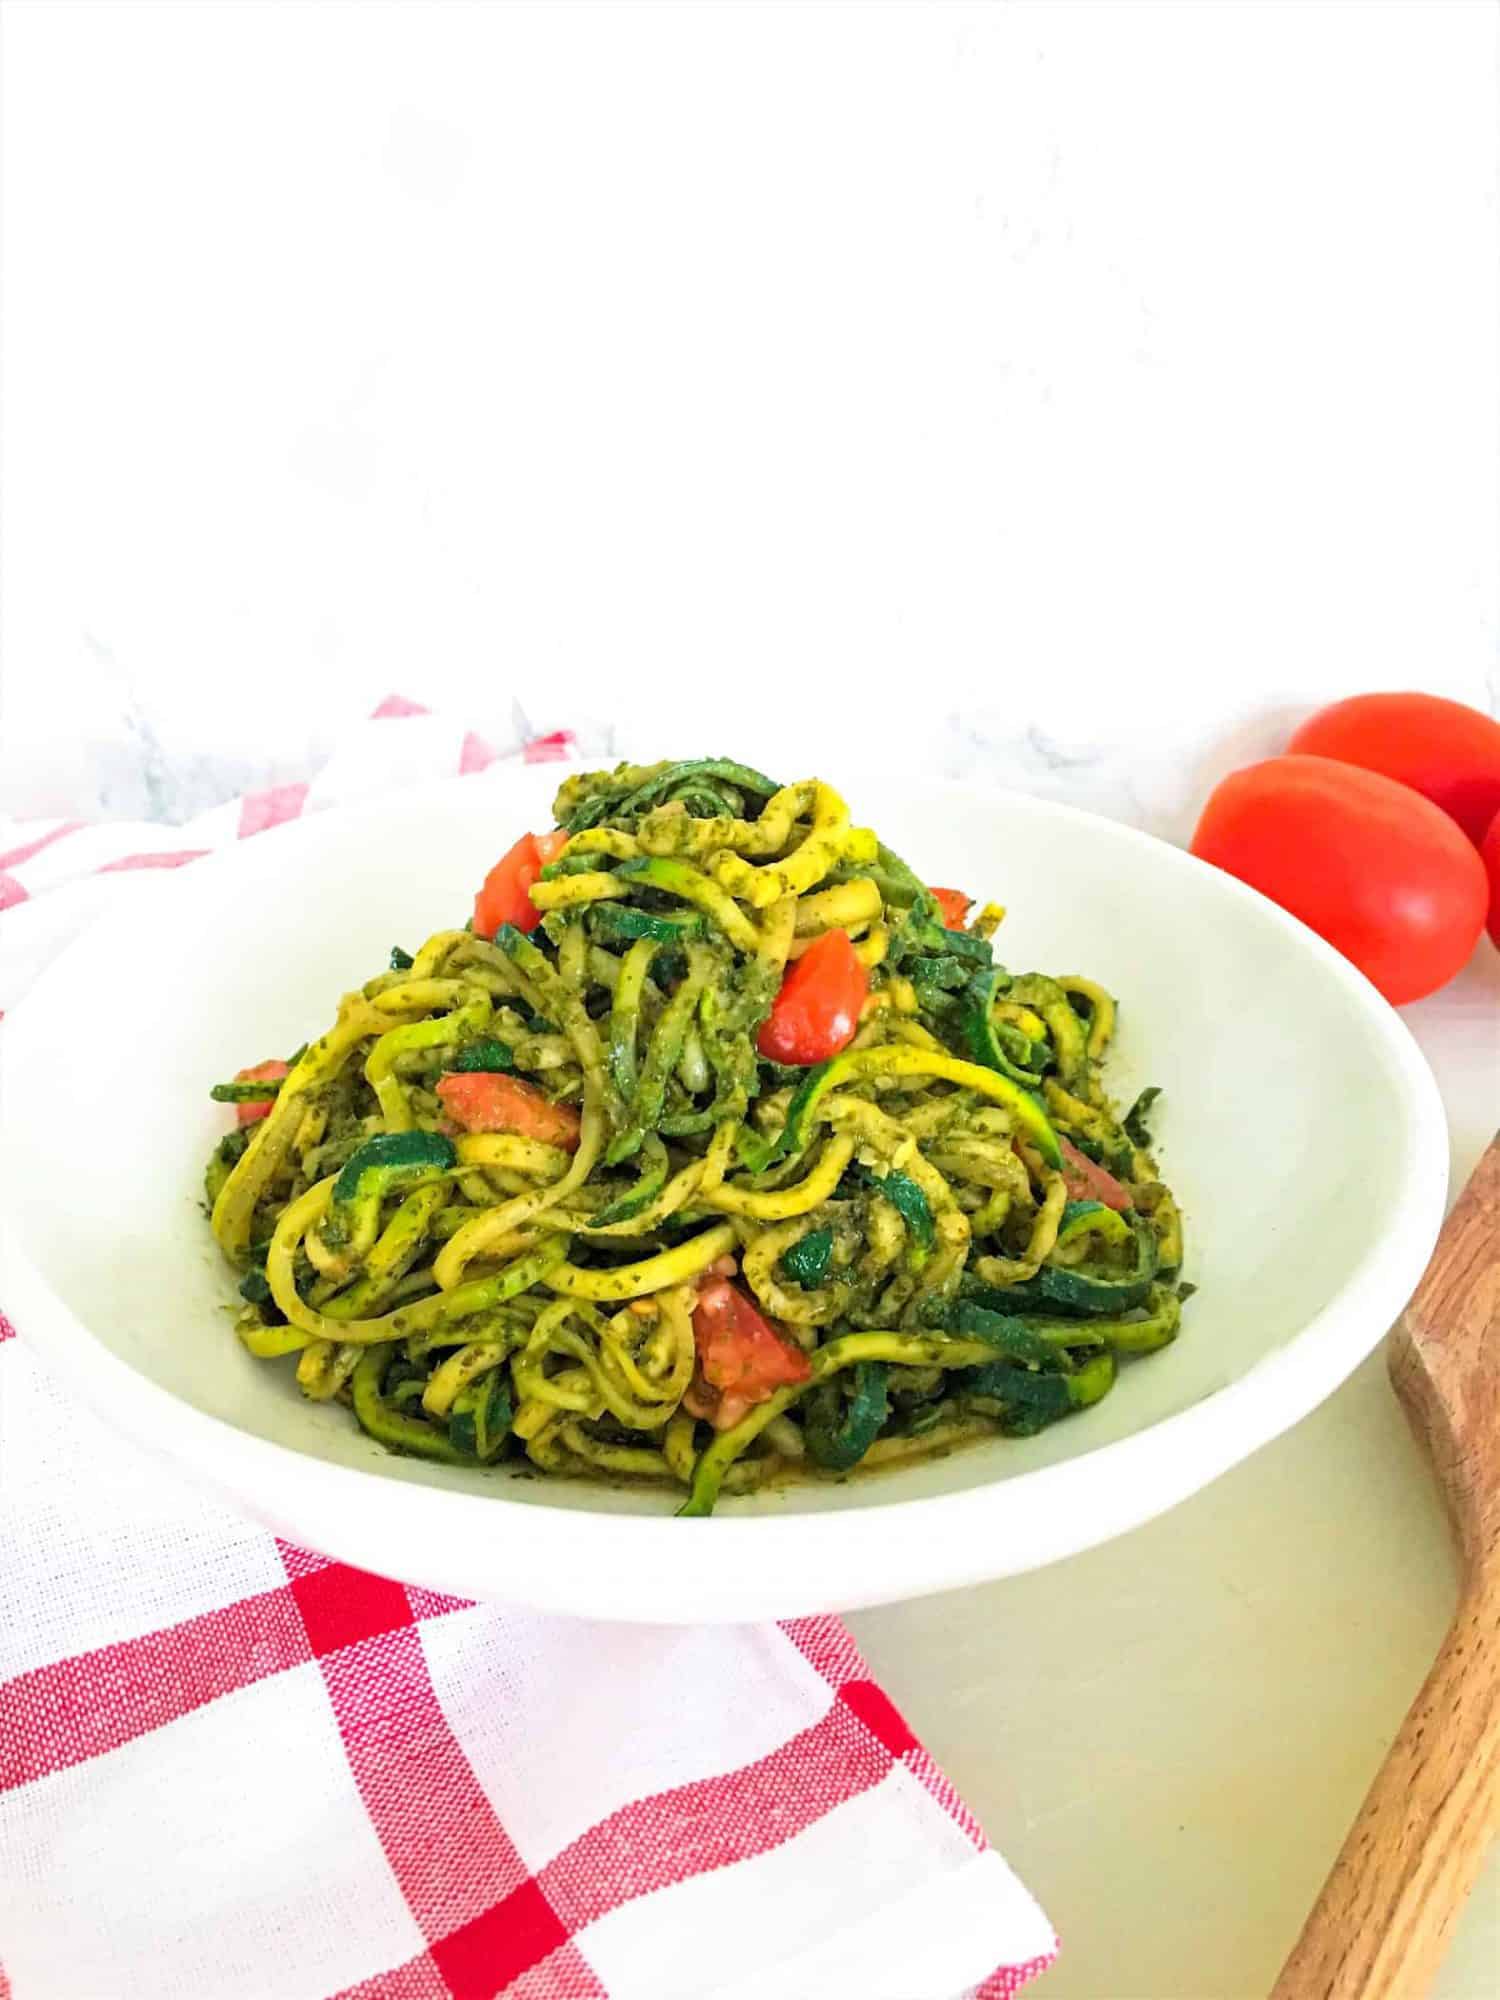 pesto zucchini noodles in plate with tomatoes in background